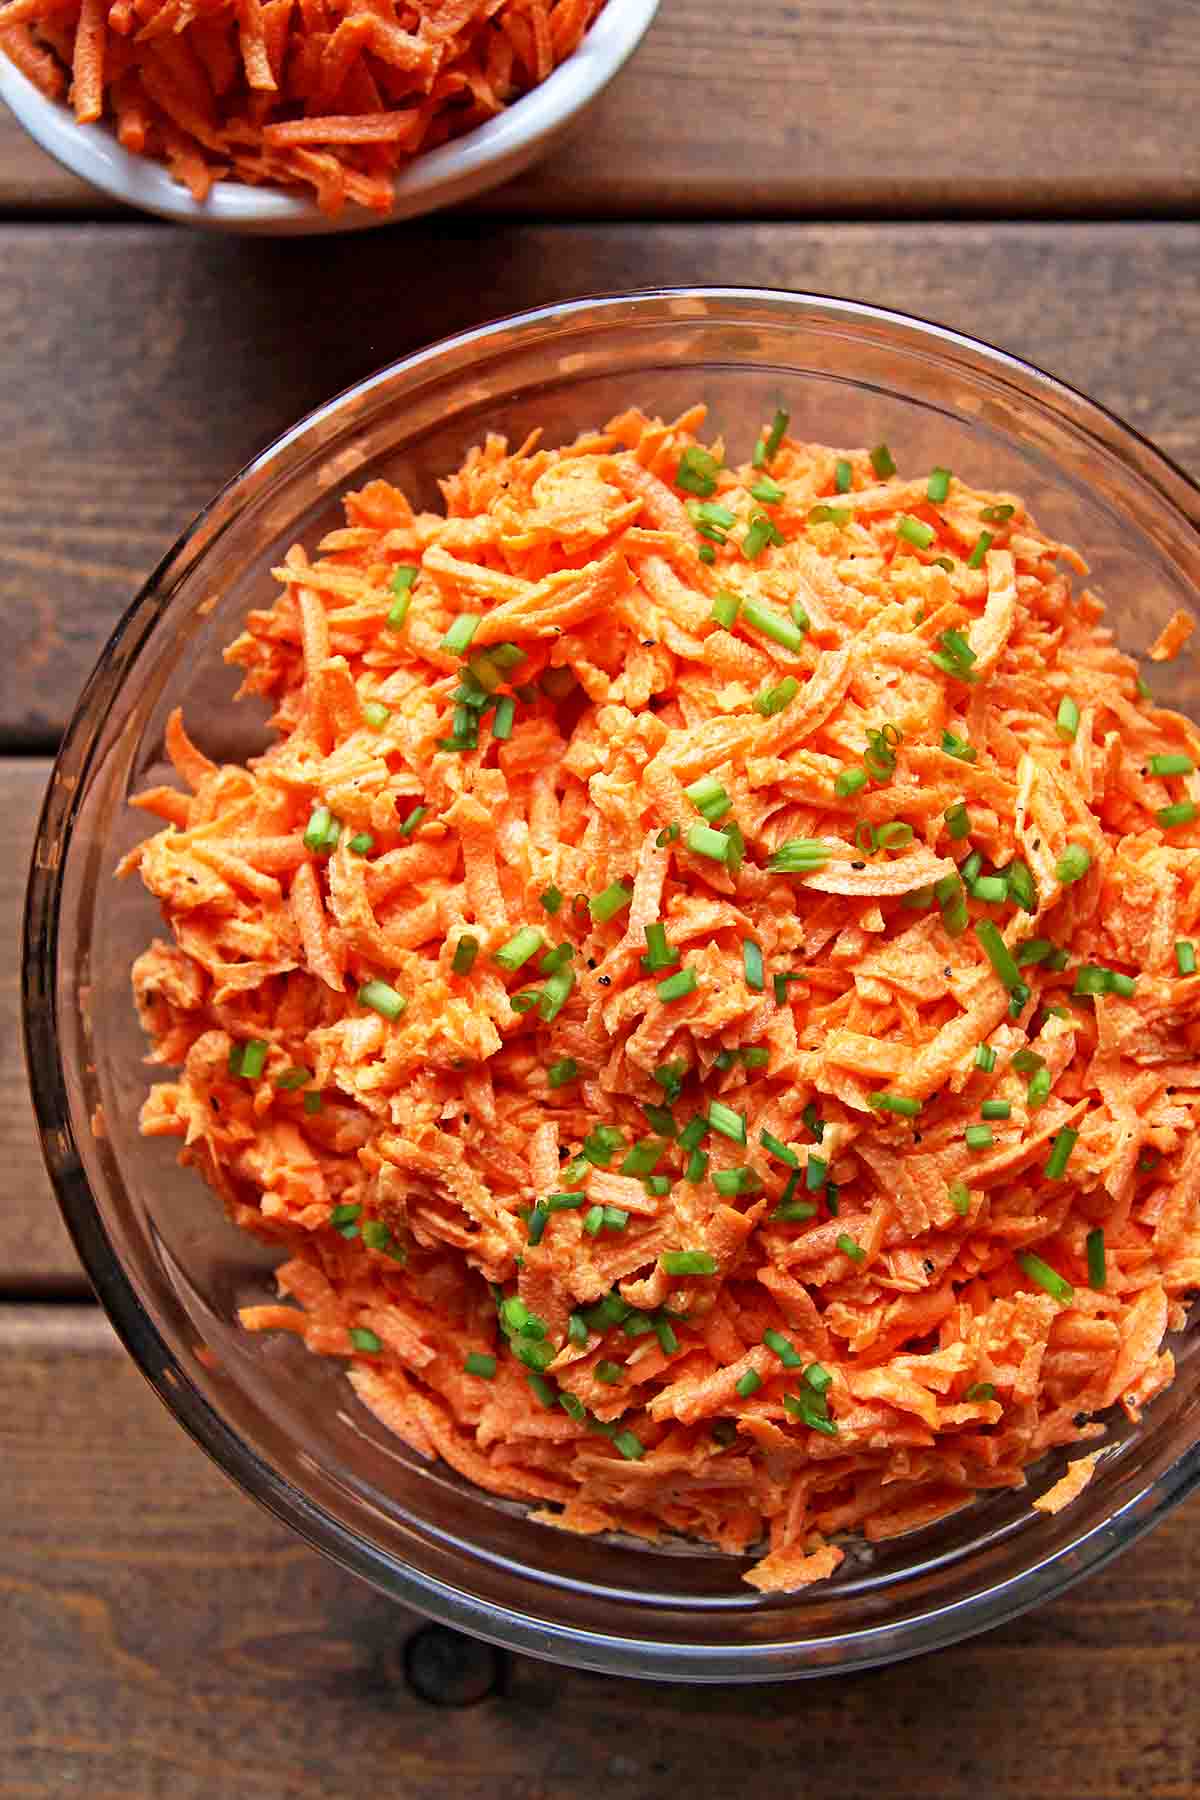 shredded raw carrot salad with green onion topping